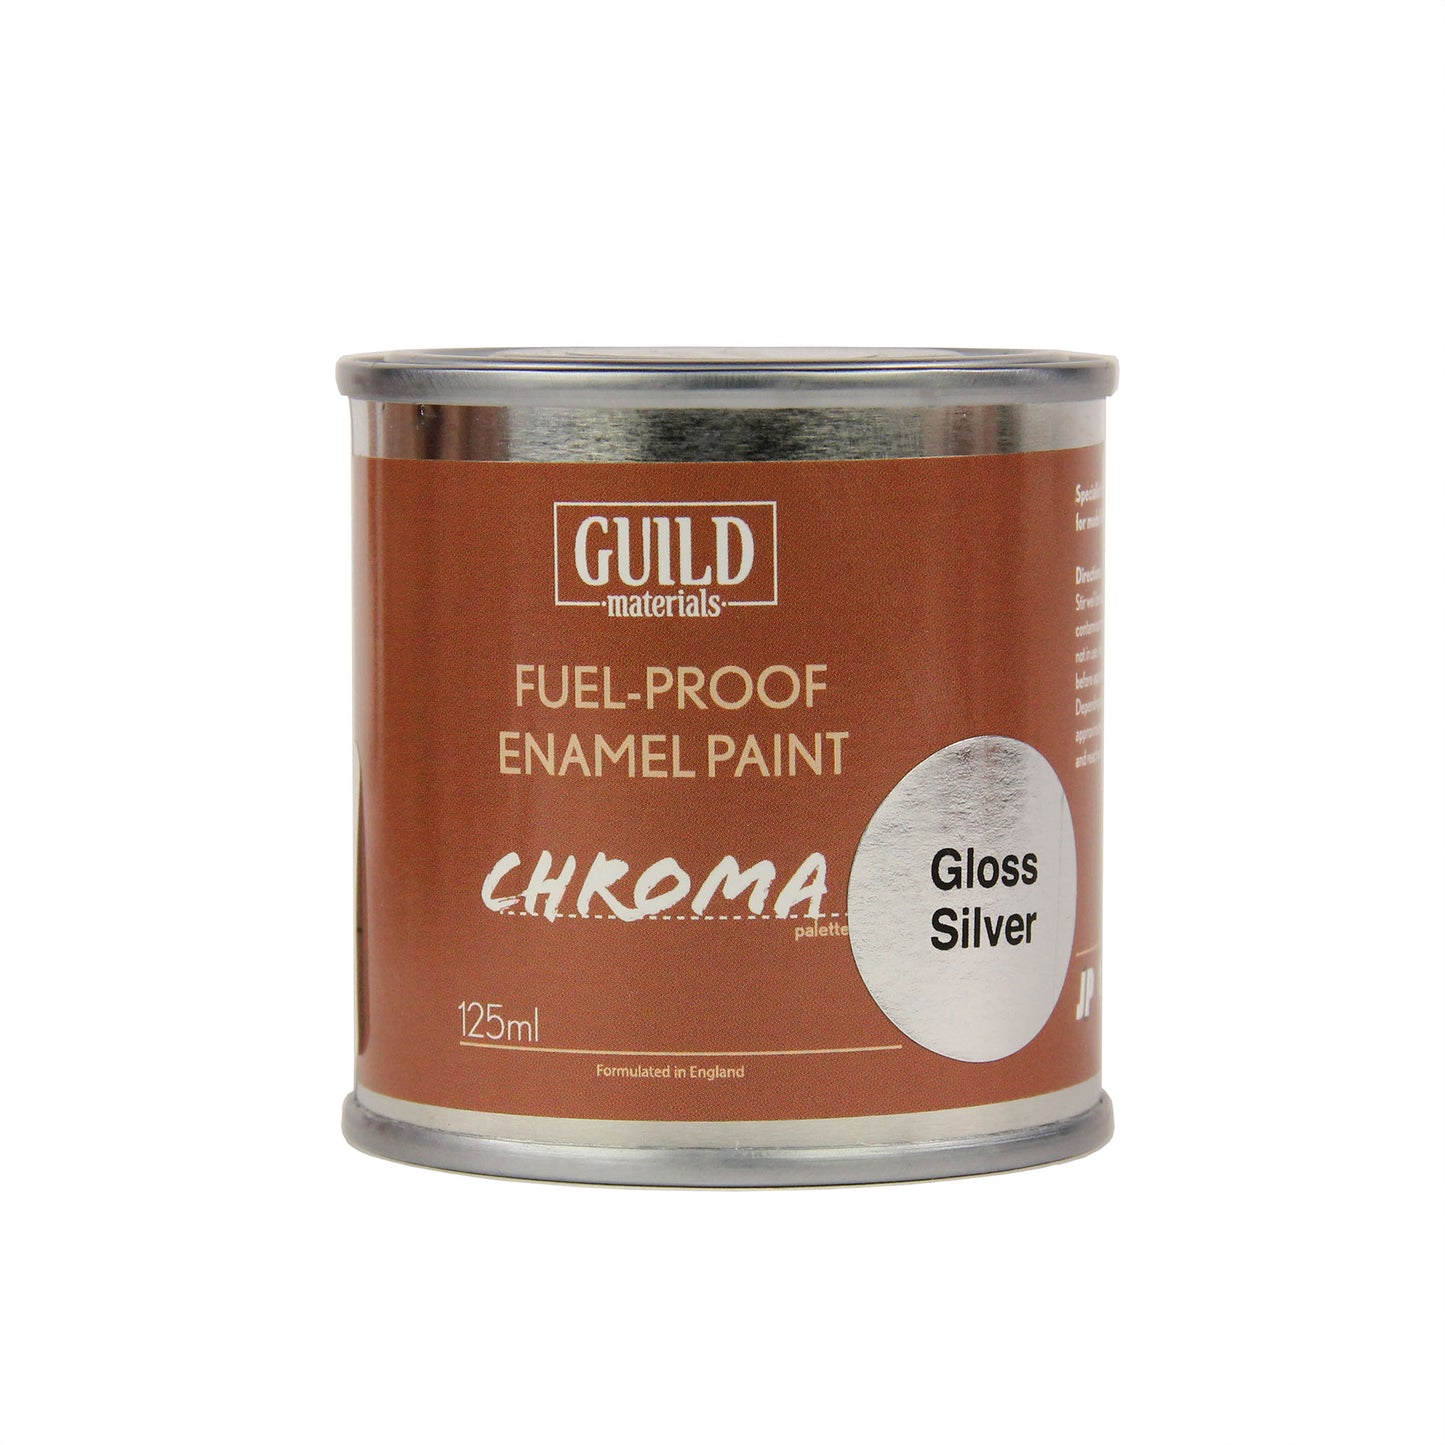 Load image into Gallery viewer, Chroma Enamel Fuelproof Paint Gloss Silver (125ml Tin)
